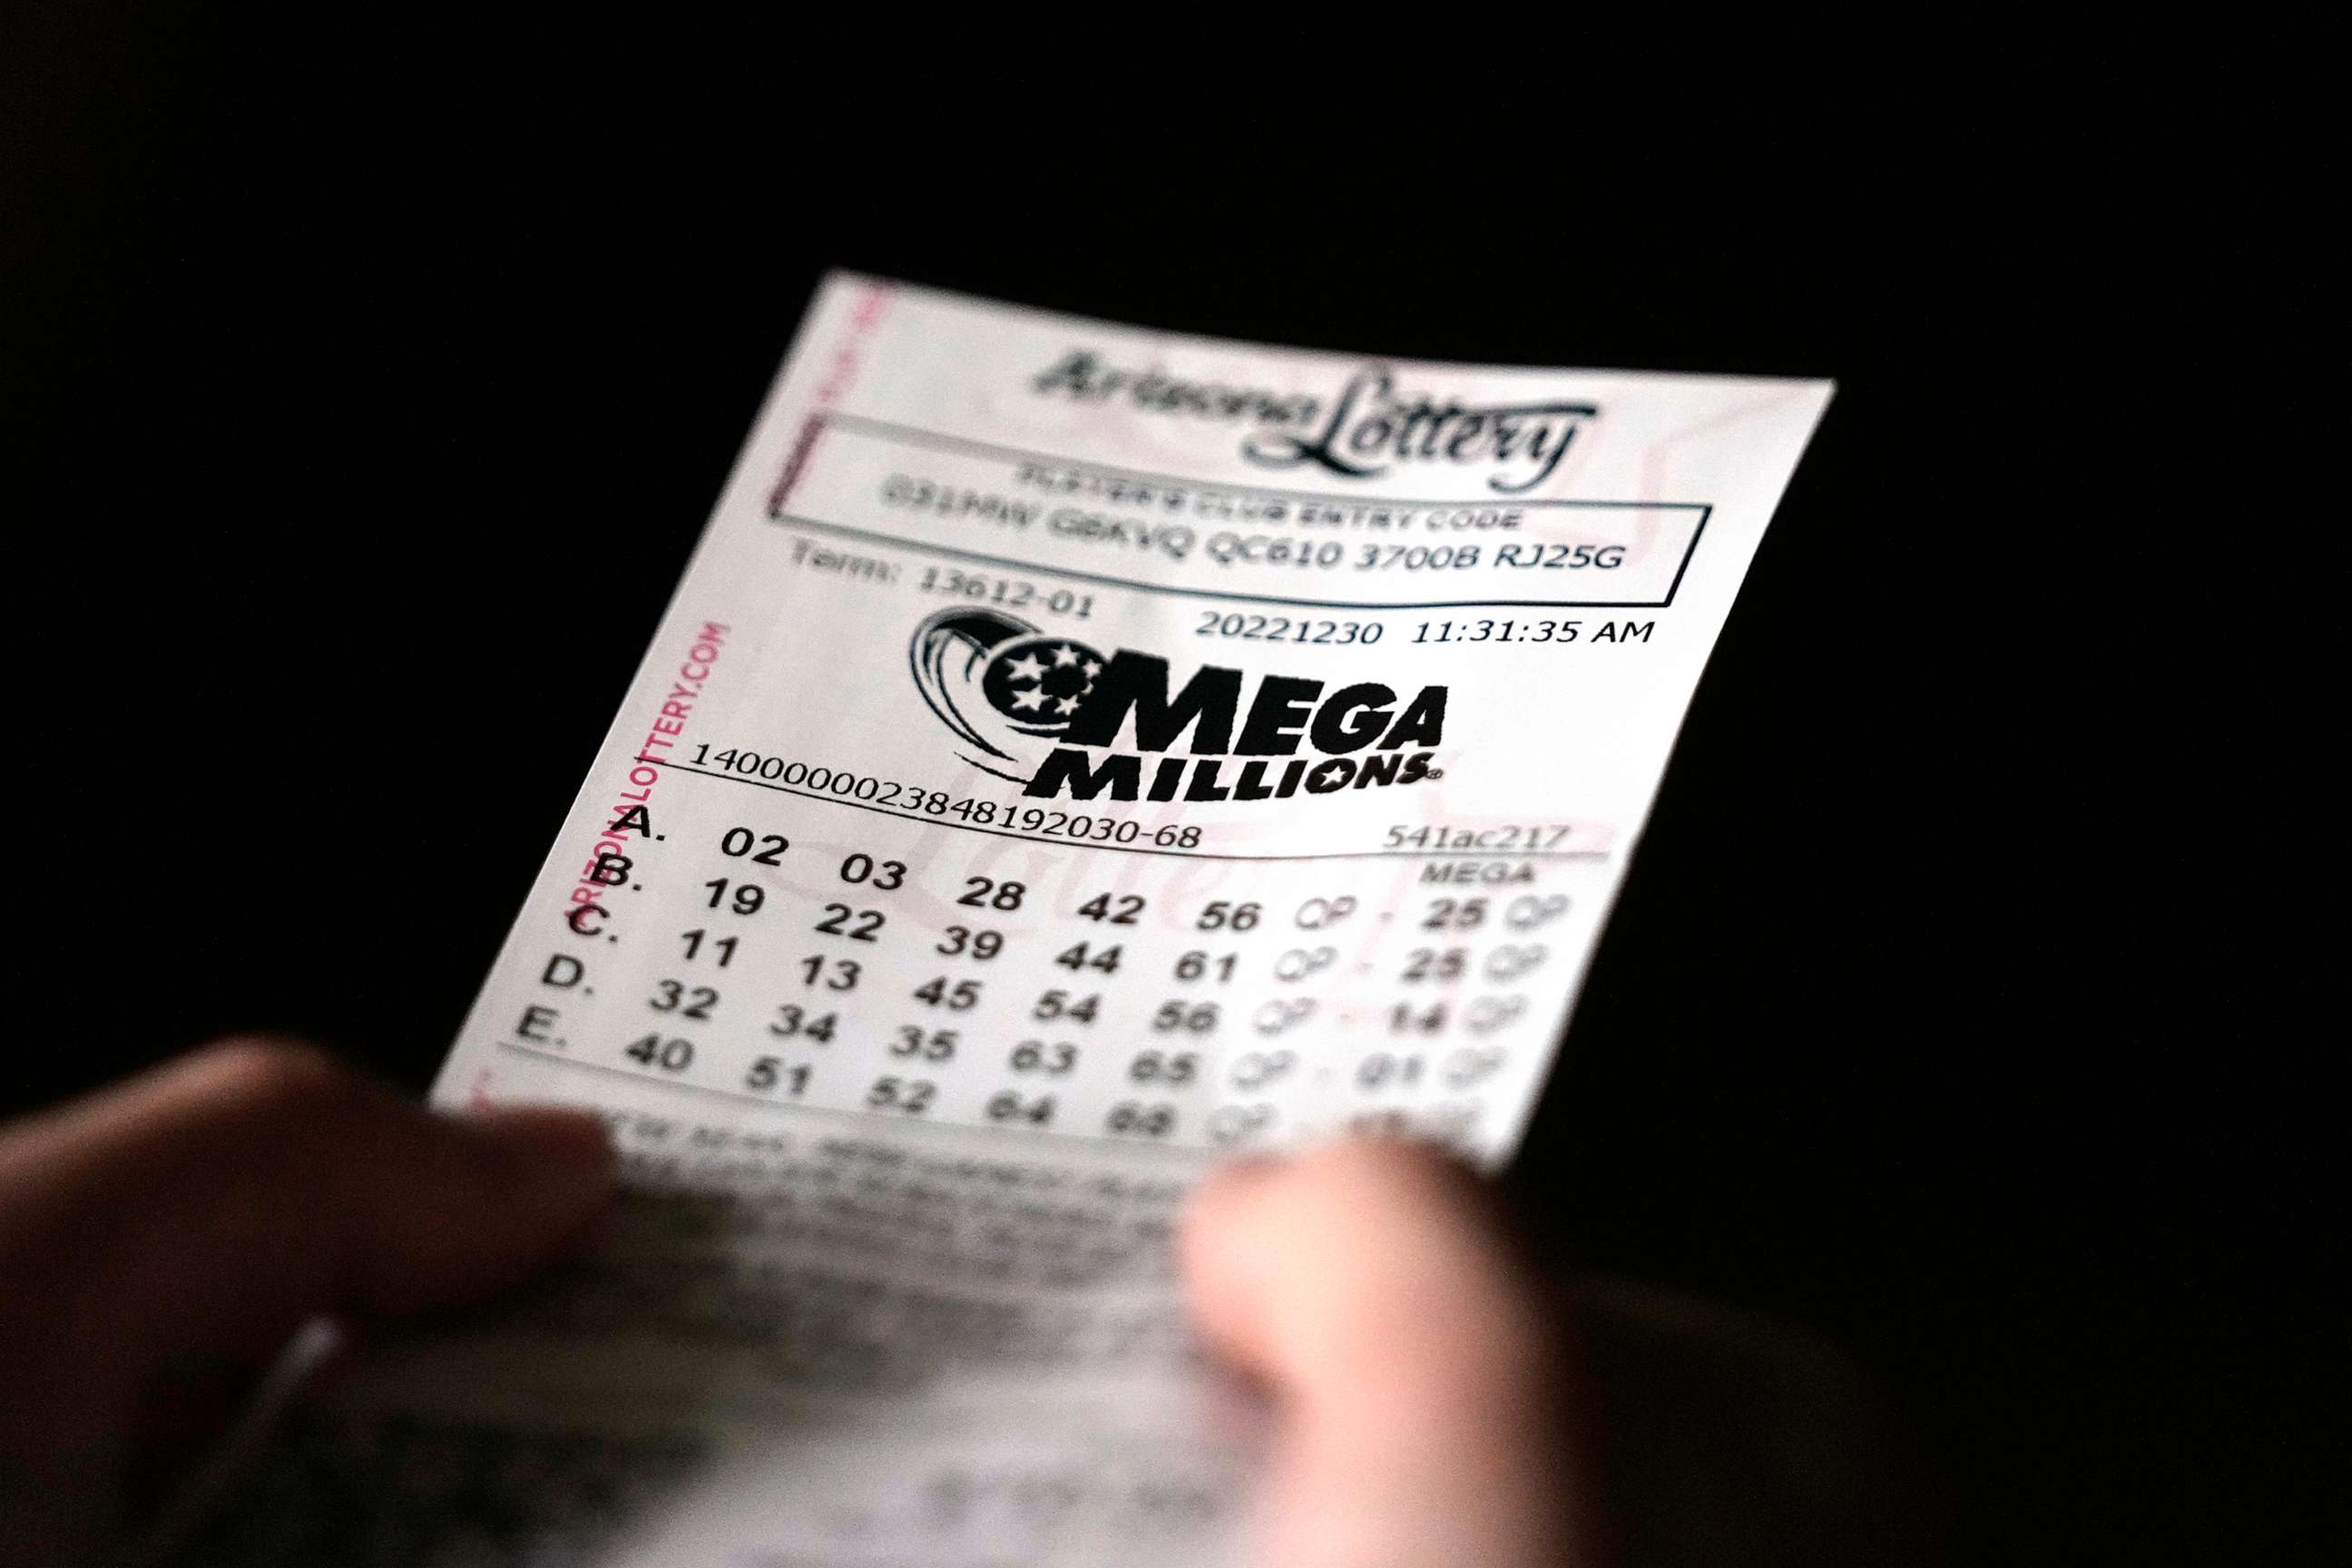 PHOTO: A person holds a Mega Millions lottery ticket in Tempe, Ariz., on Dec. 30, 2022.